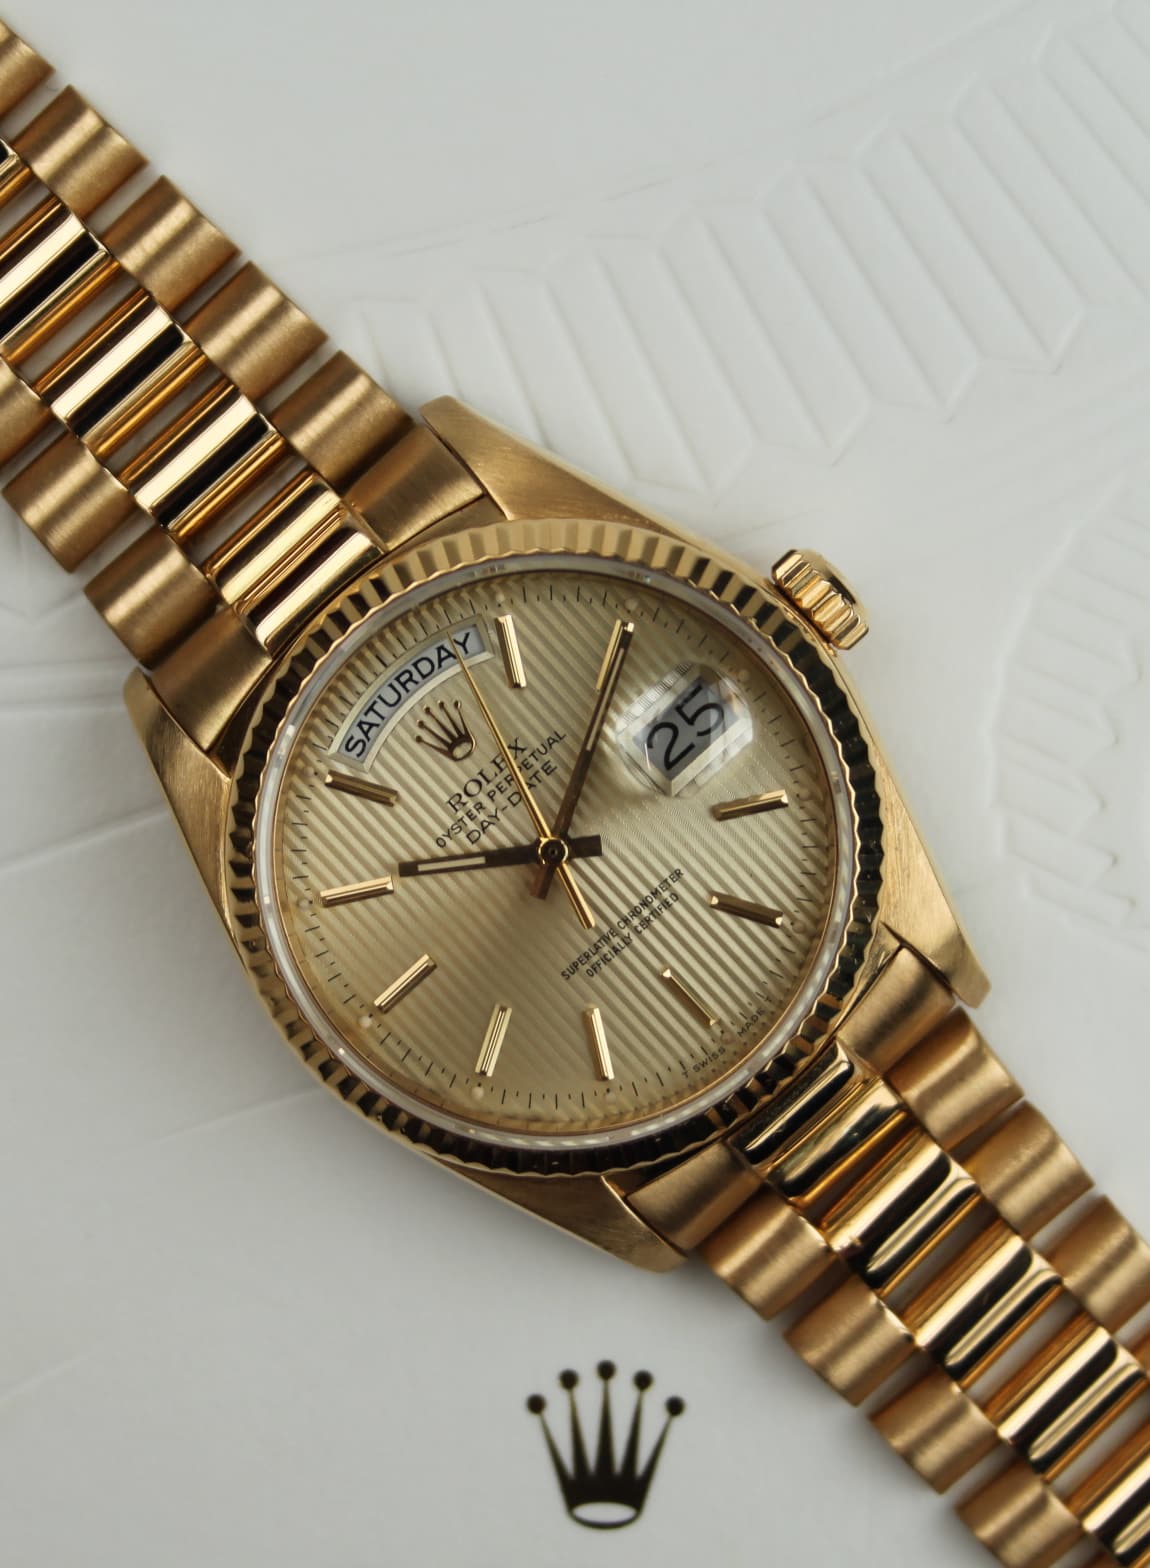 Rolex Day Date 18038 From 1986 Preowned Automatic Watch